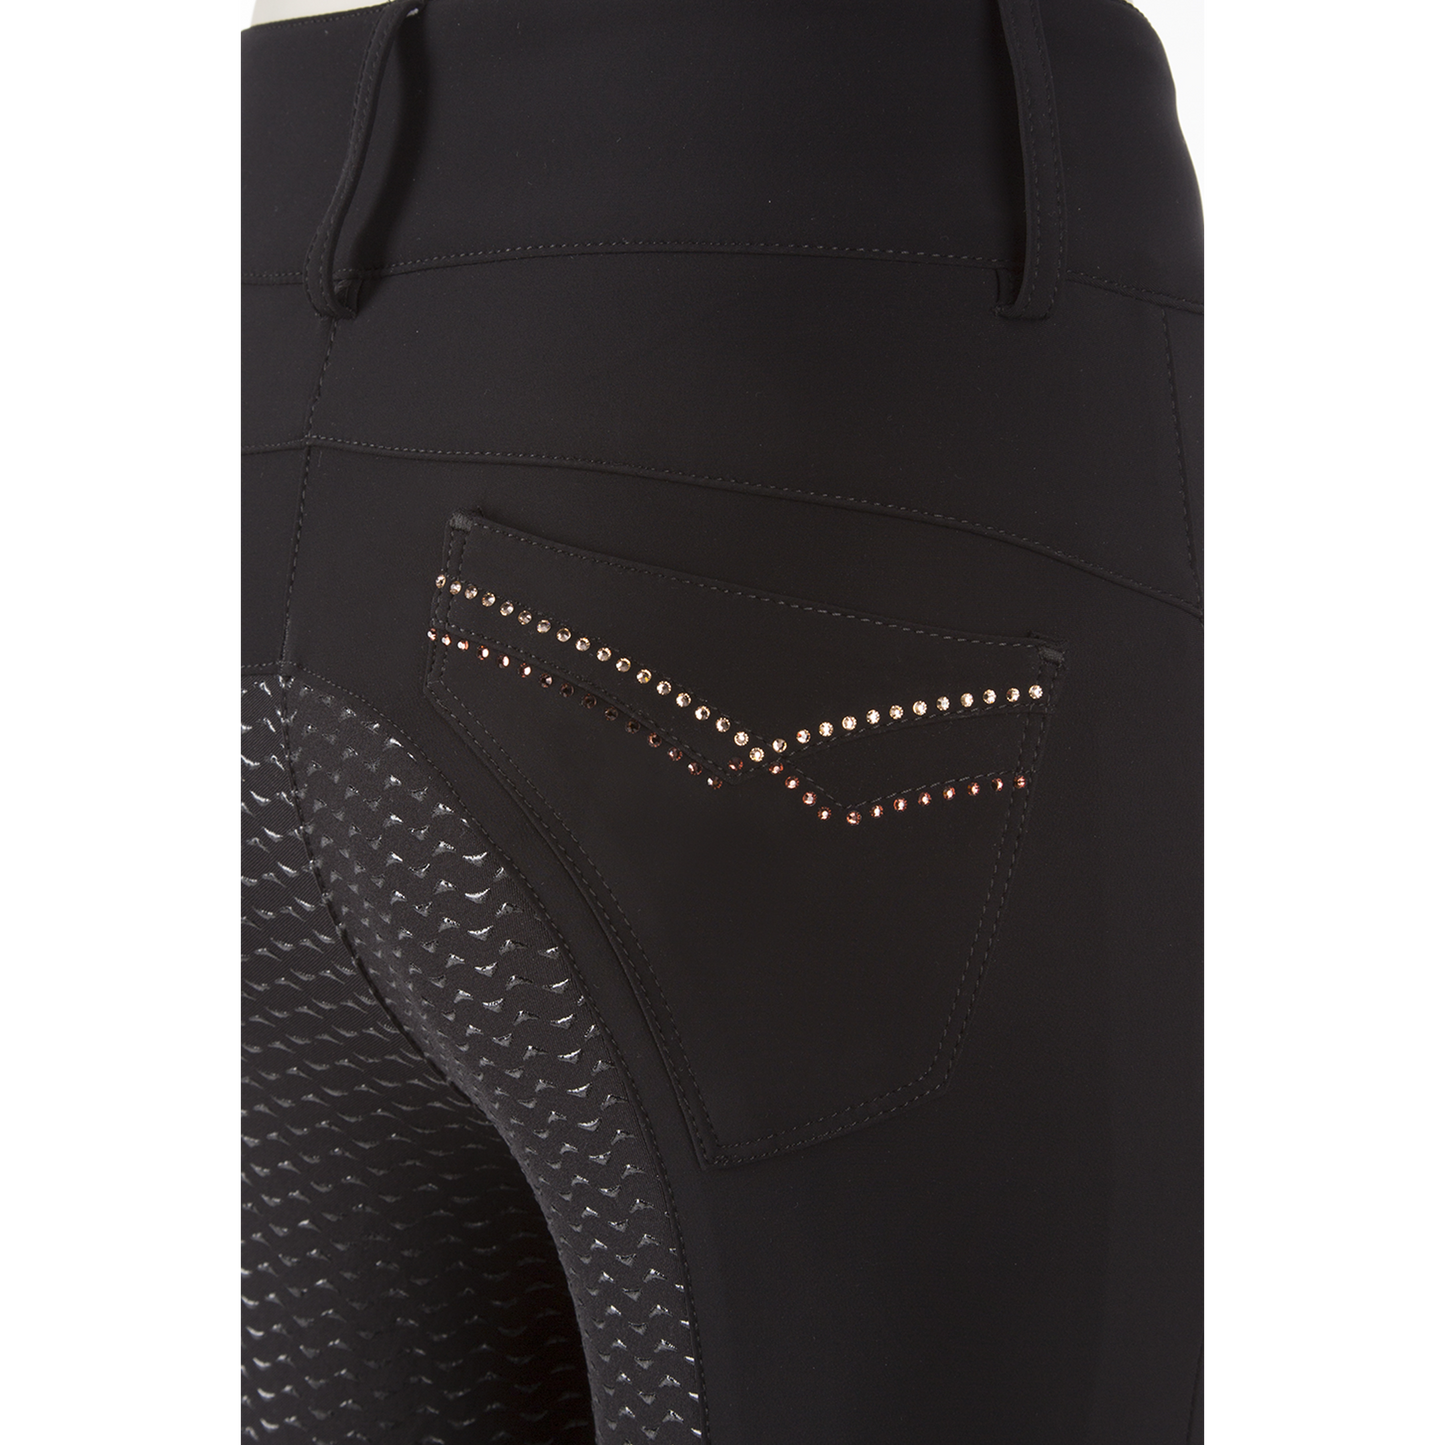 Animo brand riding breeches with embellished pocket and grip texture.